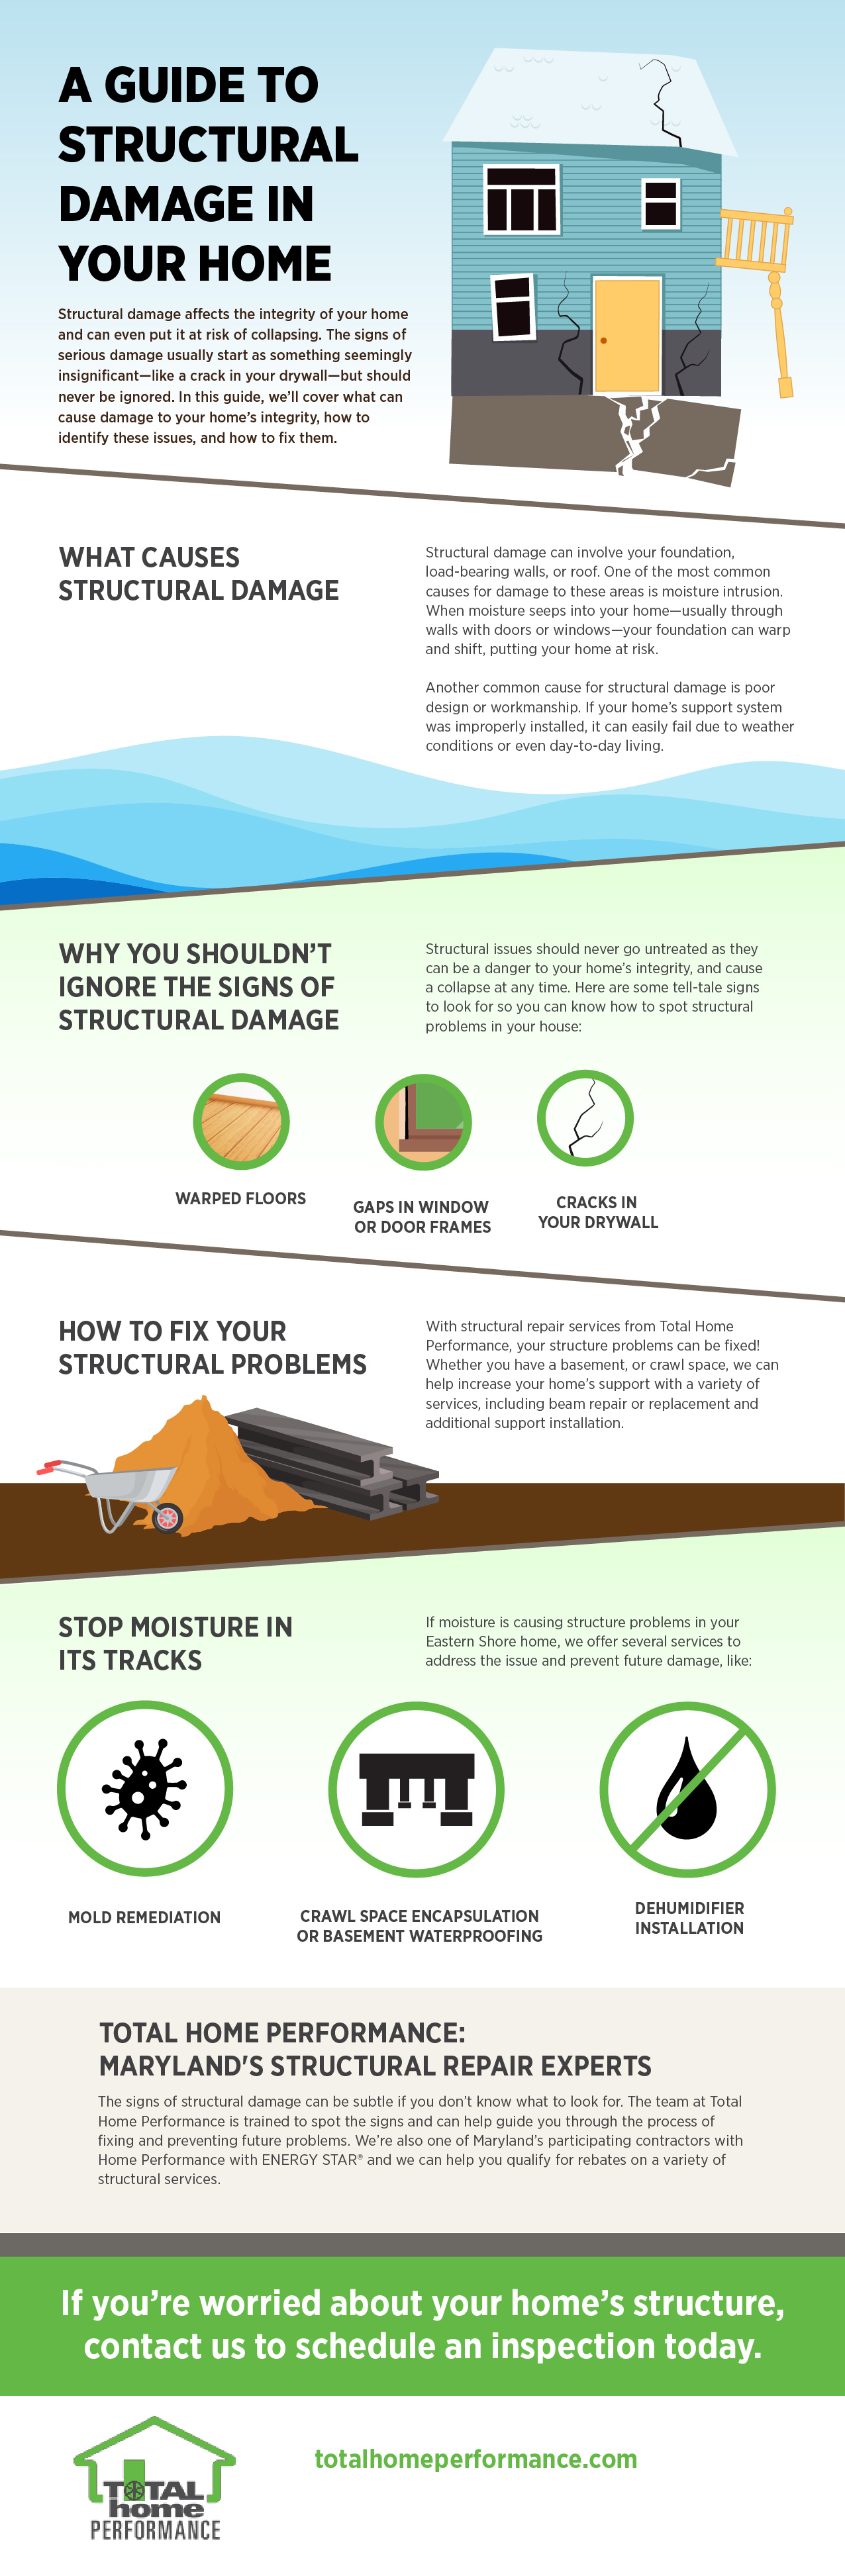 A Guide to Structural Damage in Your Home infographic